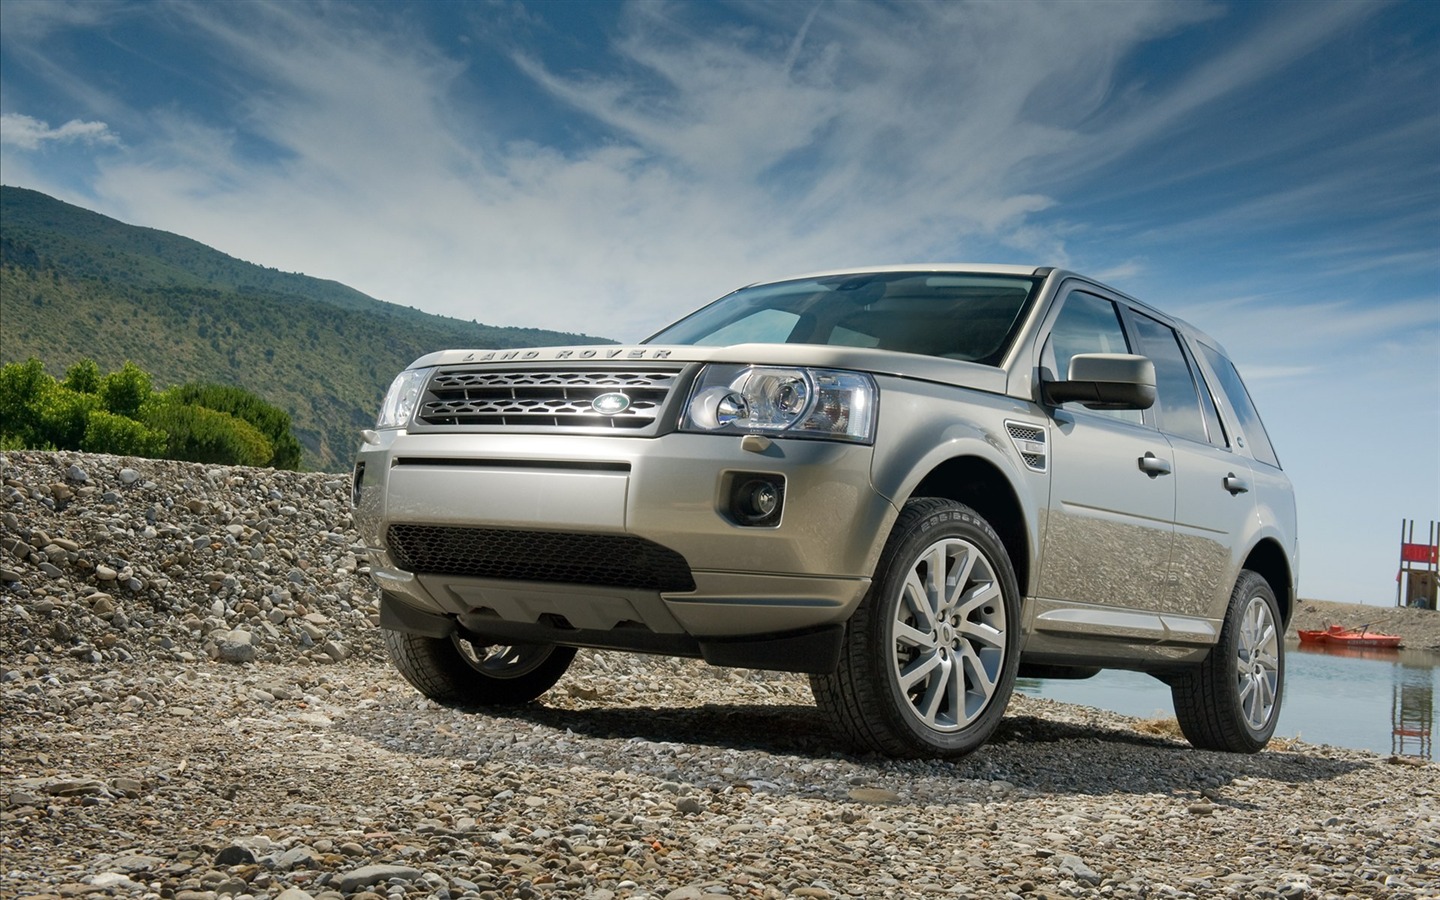 Land Rover wallpapers 2011 (1) #5 - 1440x900